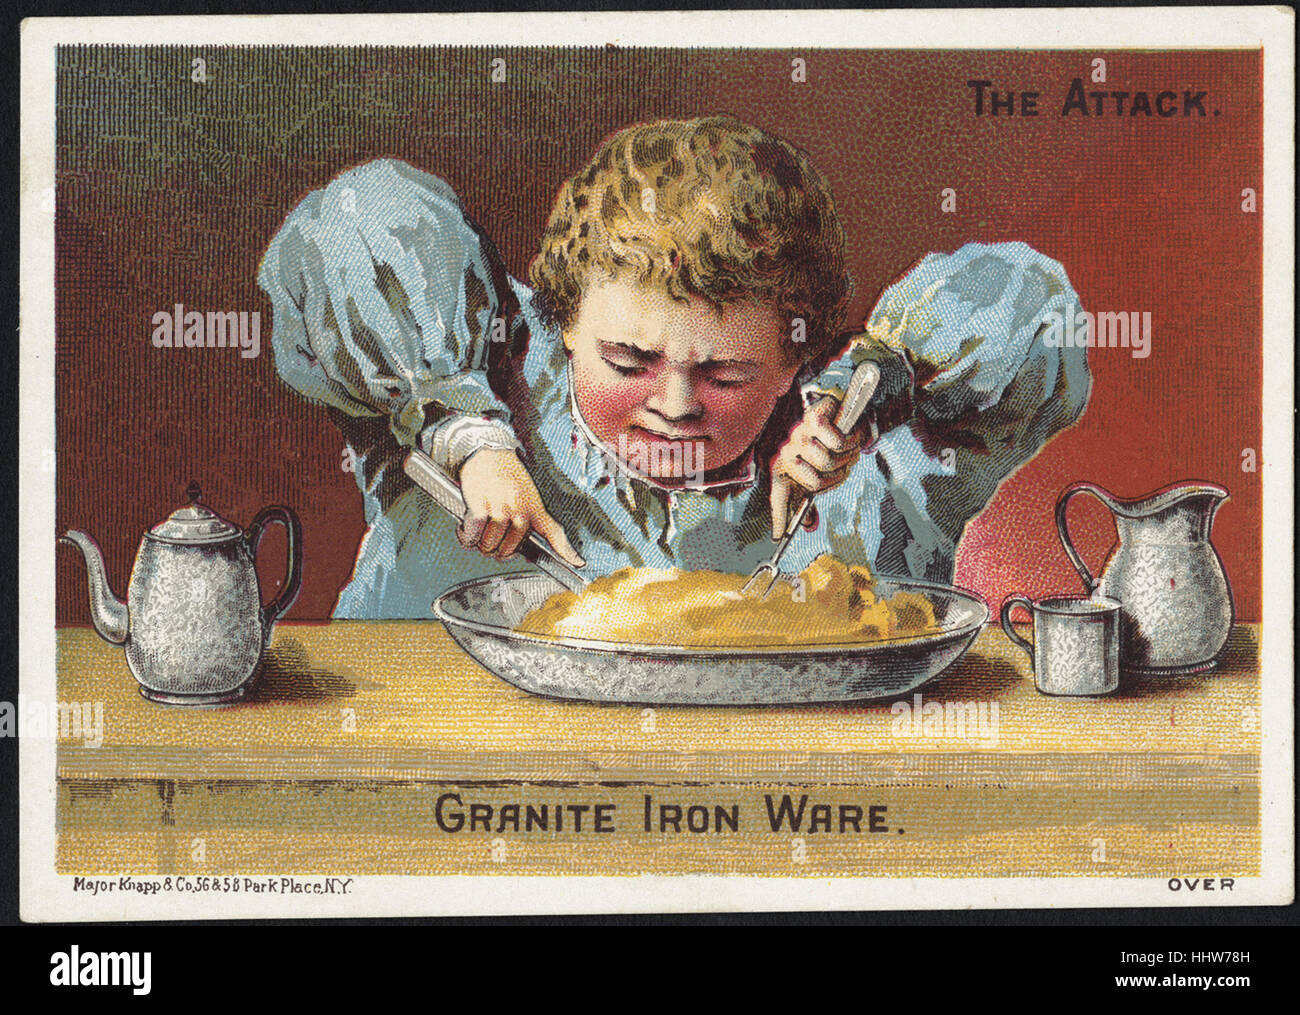 The attack. Granite iron ware. (front)  - Home Furnishings Trade Cards Stock Photo